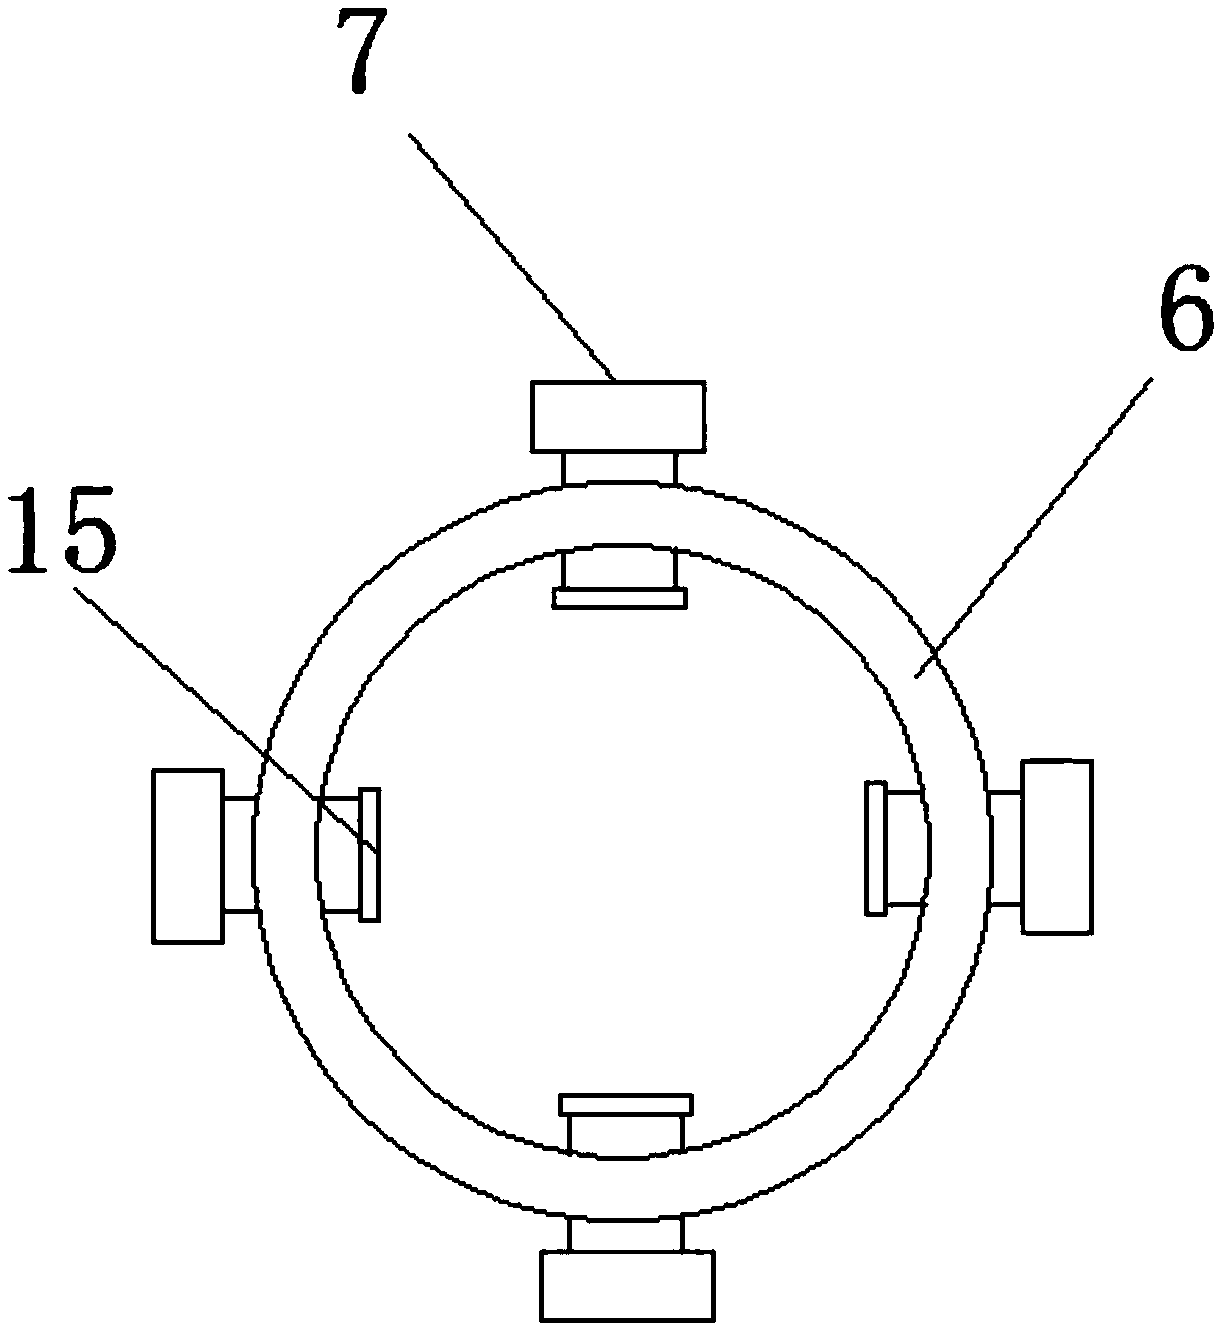 Limiting device for spring machining